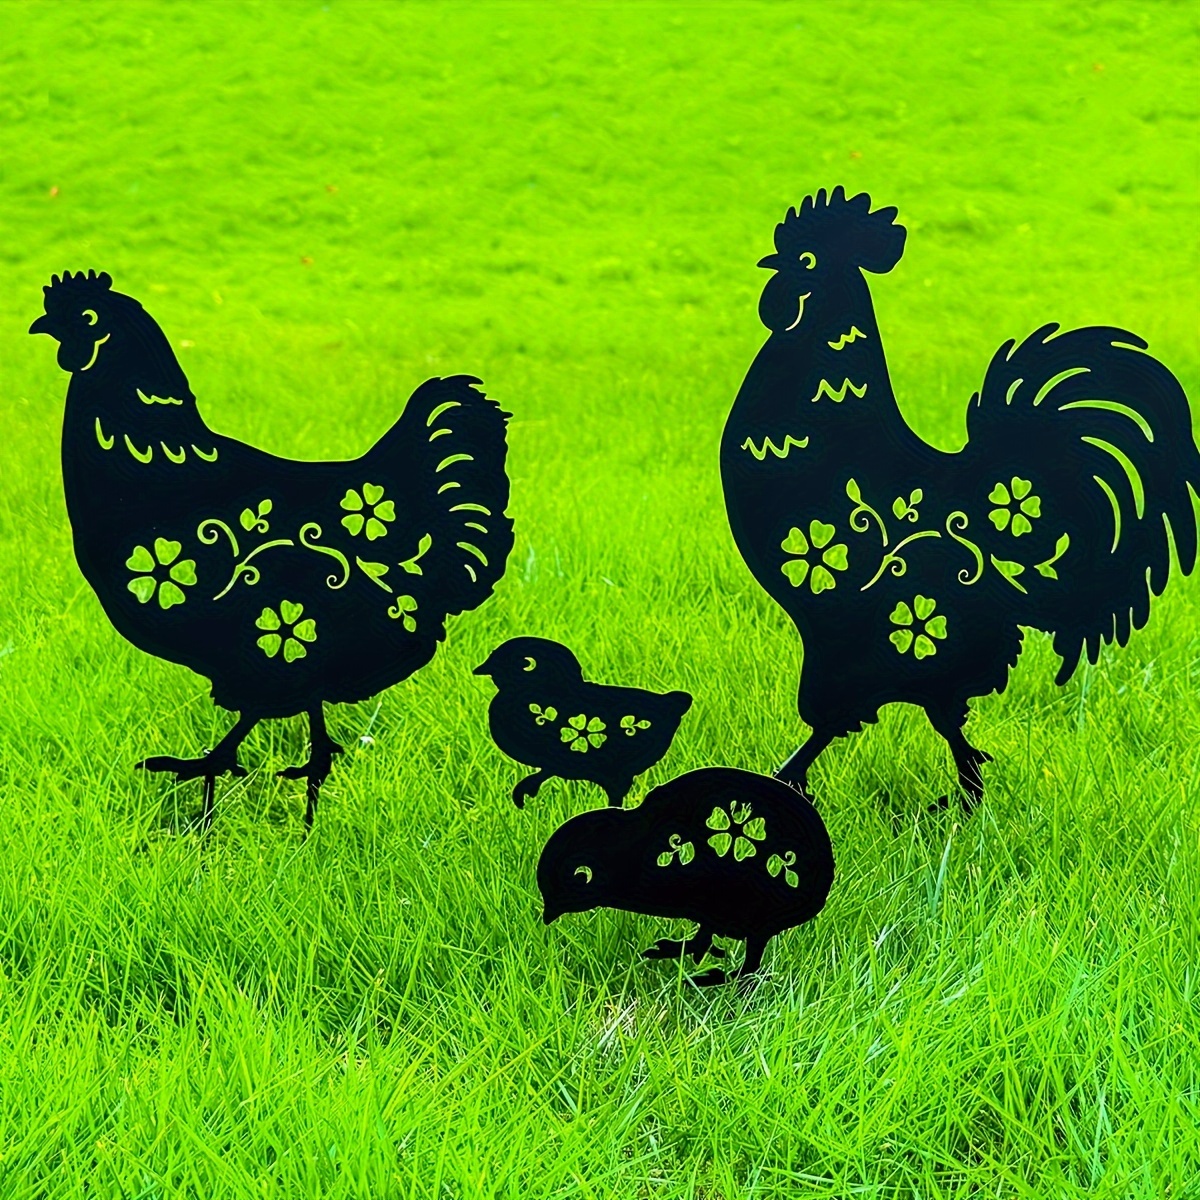 

4pcs, Chicken Yard Art Garden Metal Statue Decor, Lifelike Rooster Hen Animals Stakes Outdoor Decorations, Black Hollow Out Chickens Family Silhouette Sets For Farmhouse Pathway Lawn